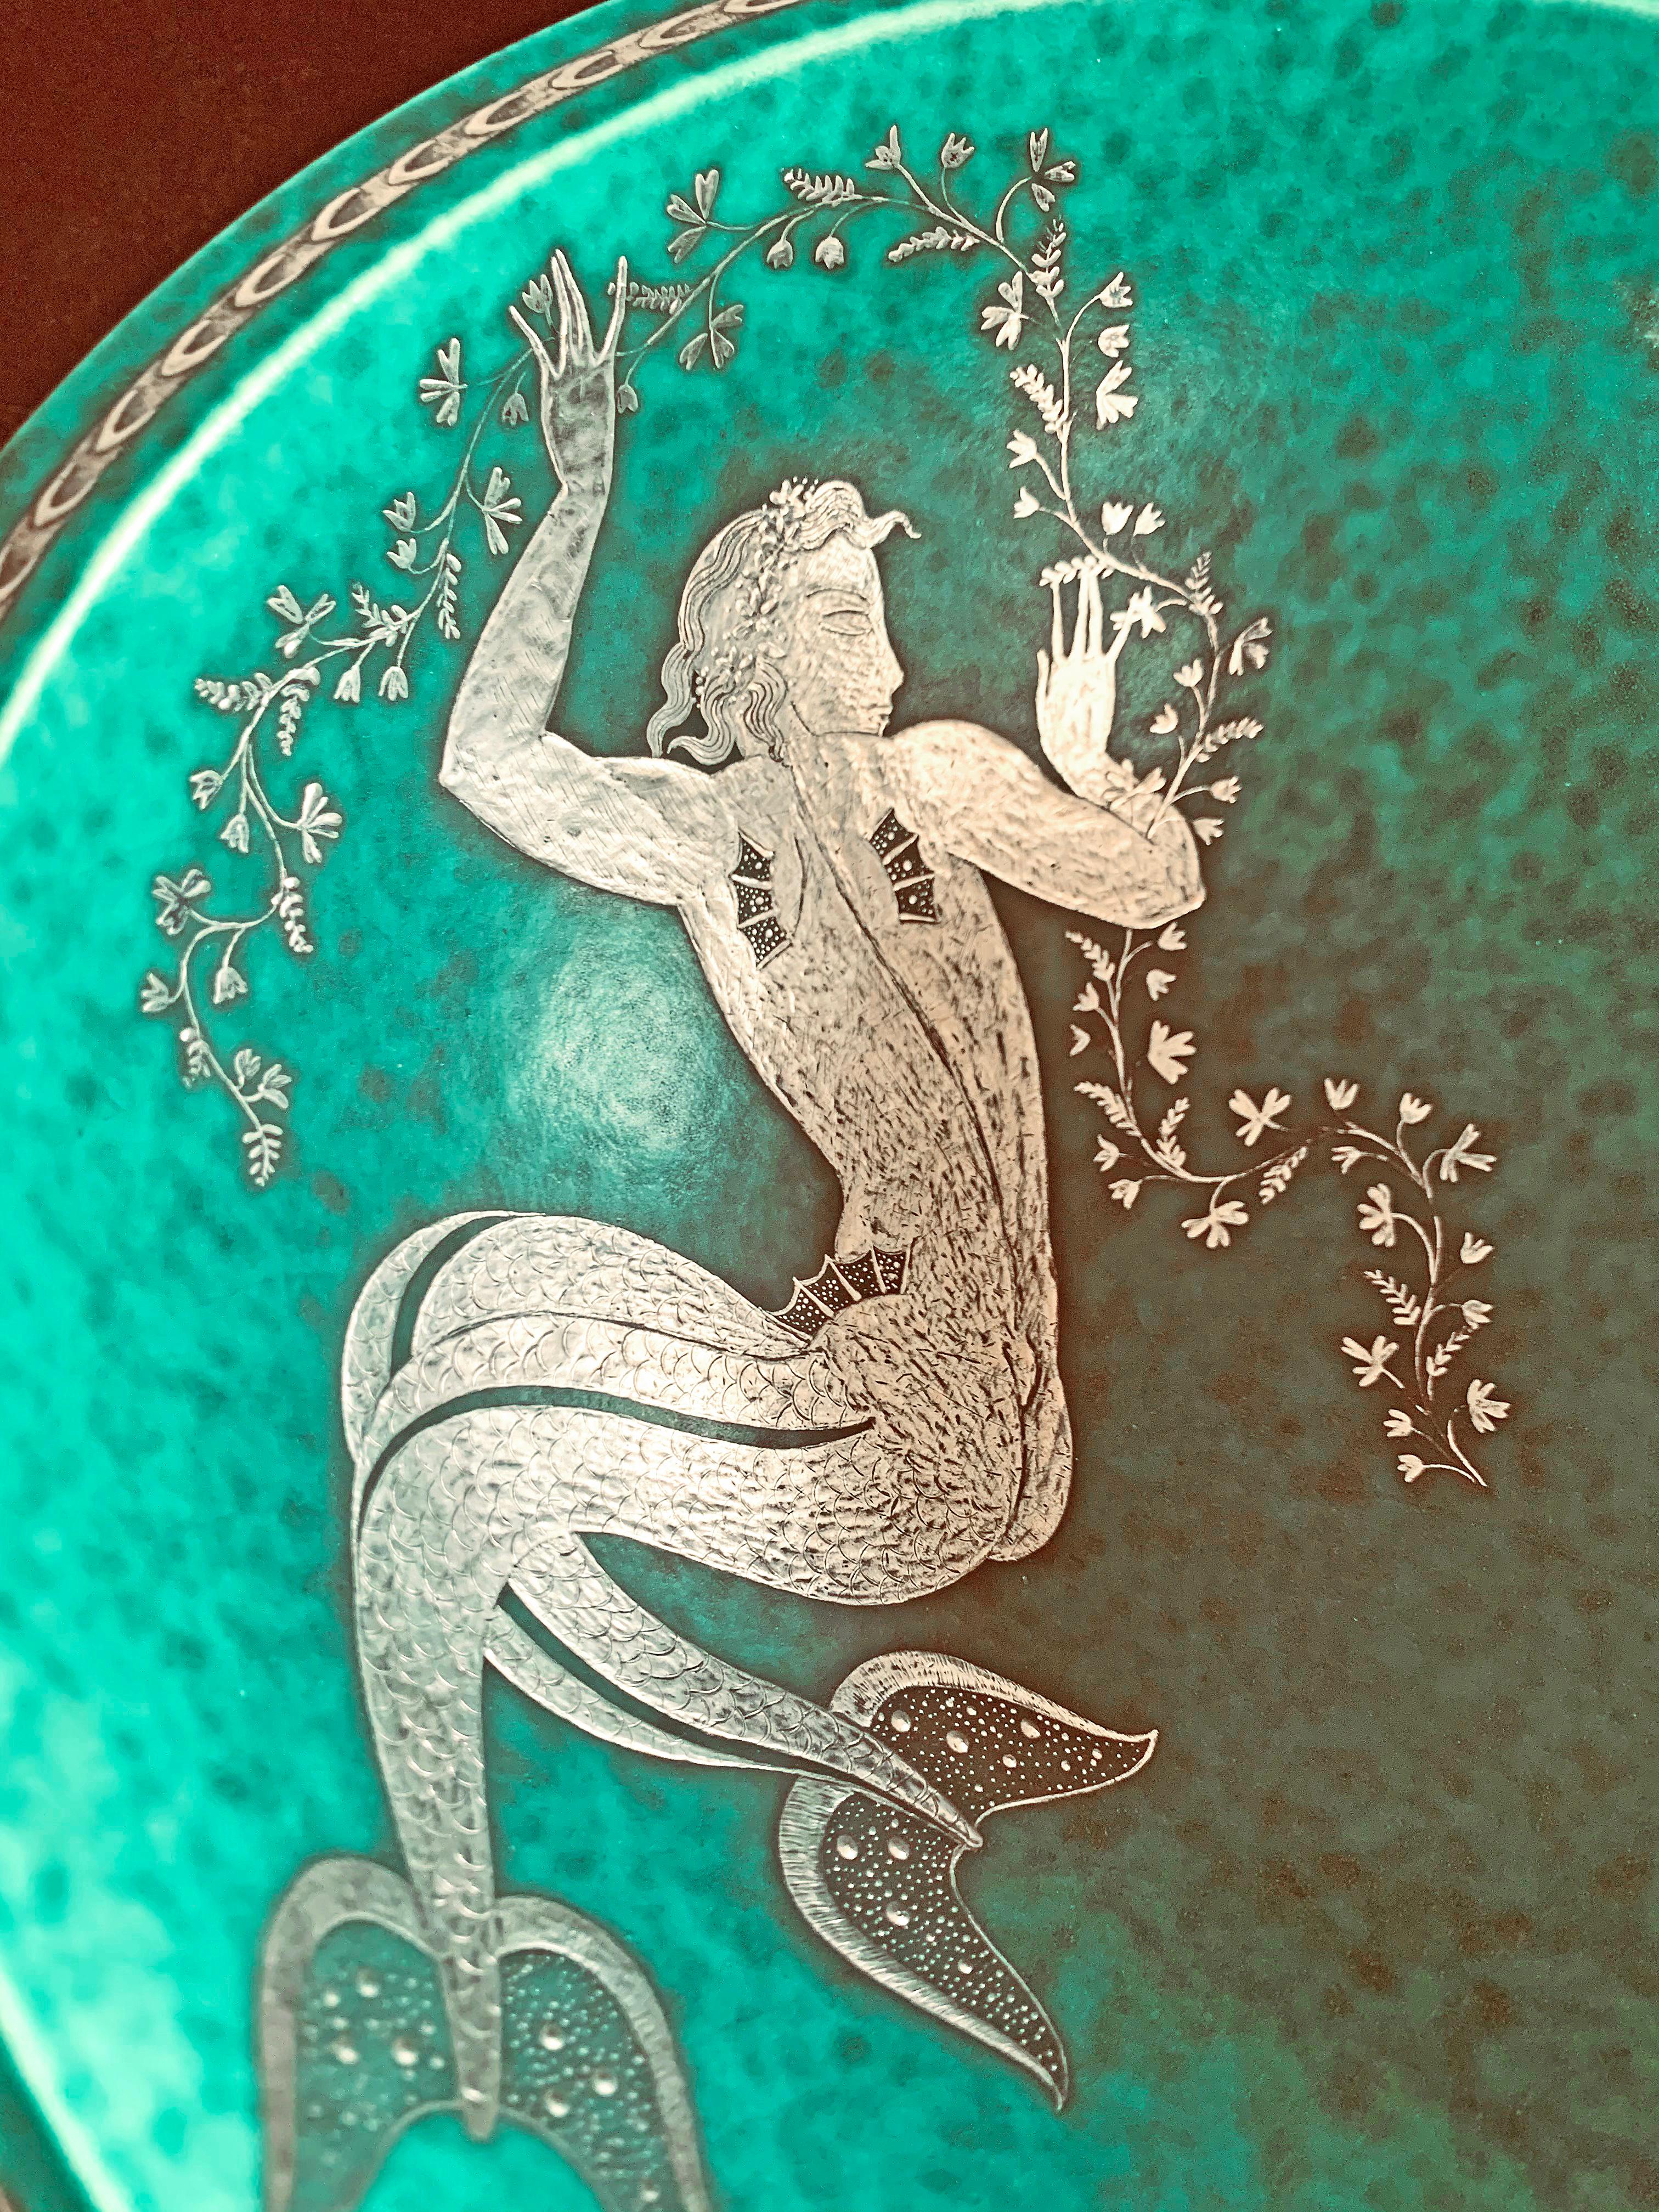 Finished in tooled silver and a brilliant green-turquoise glaze, this heavy porcelain bowl in the Argenta series by Gustavsberg is unusual in that its primary feature, a mermaid swimming in the sea while holding a flowered garland, has been applied